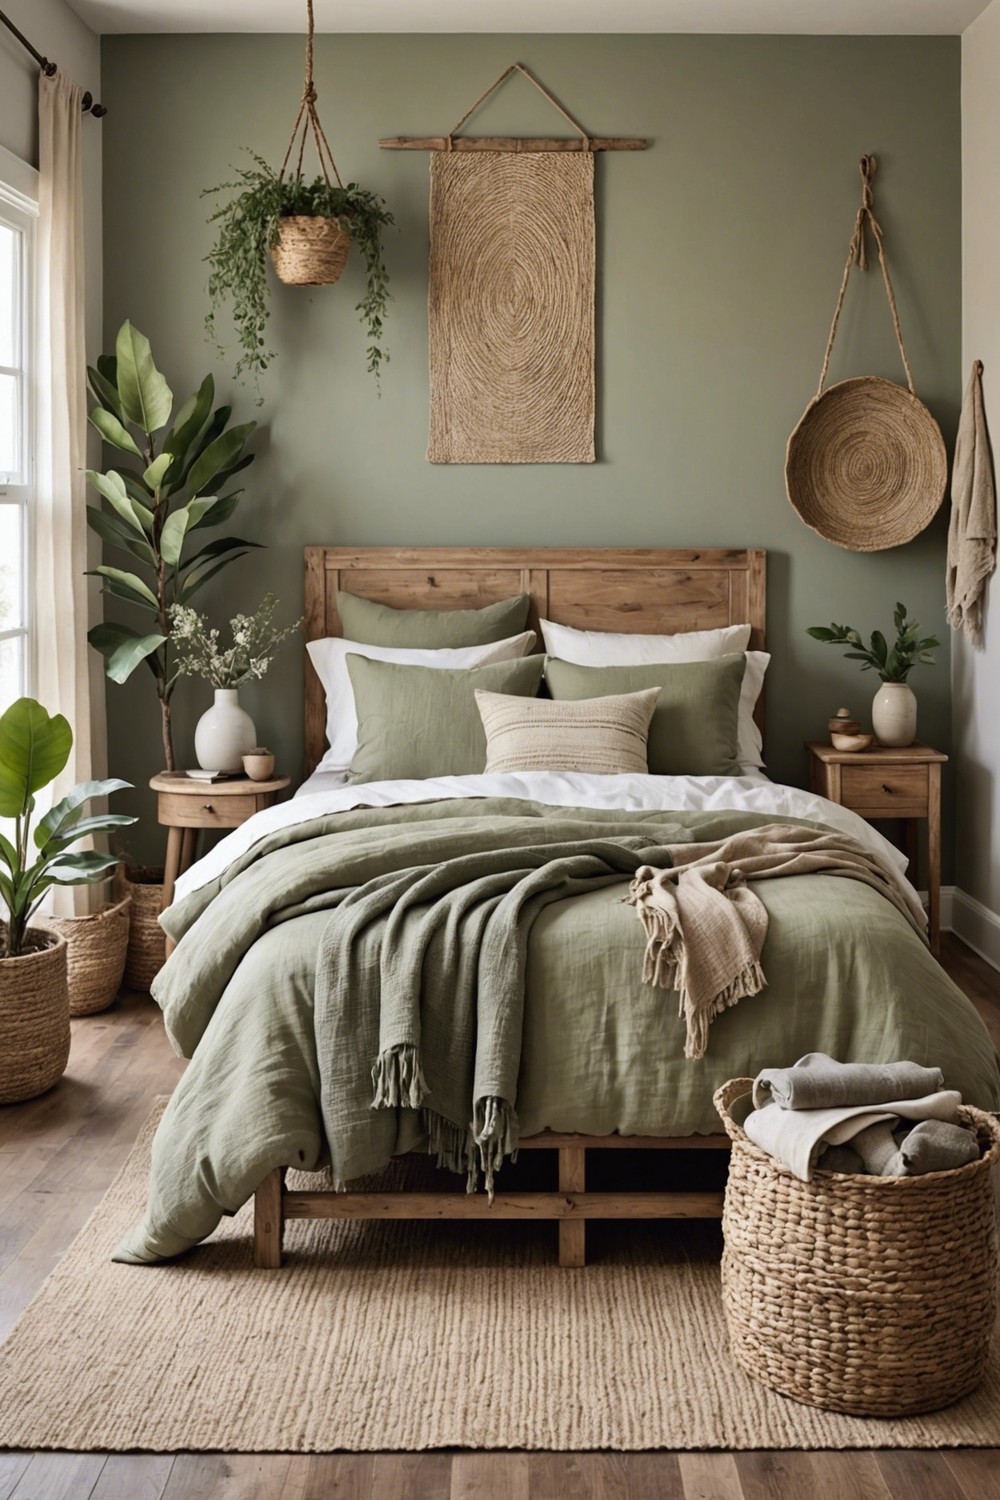 Earthy Delights: A Bedroom That Celebrates Nature